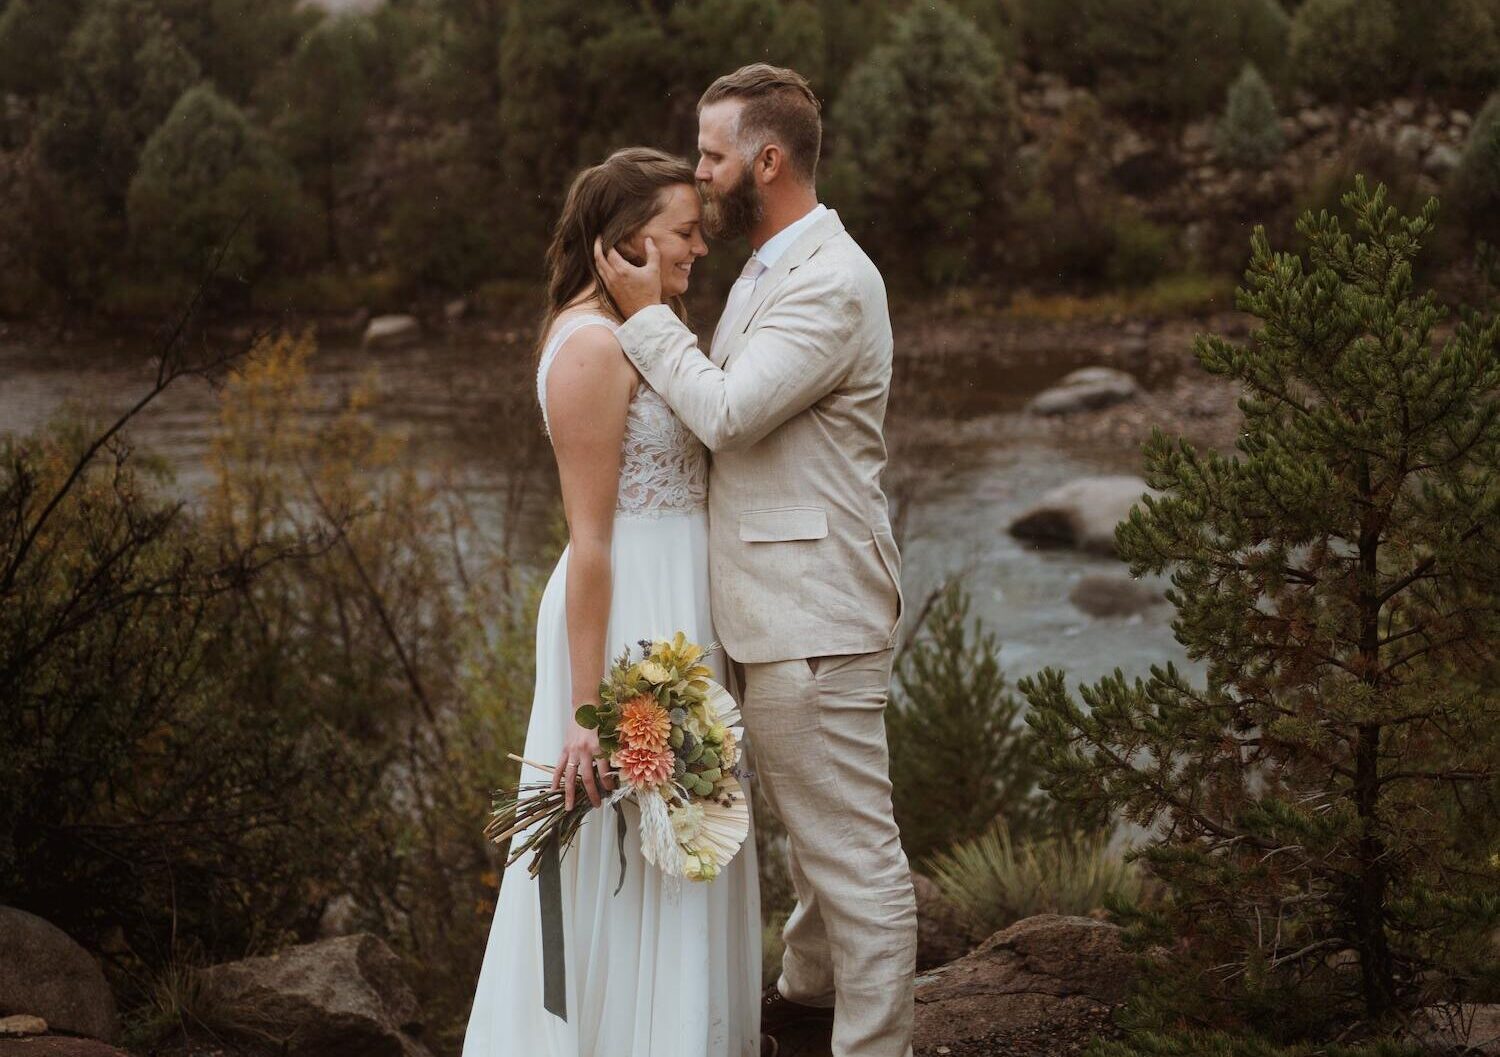 How to create a full day elopement in the Rocky Mountains.